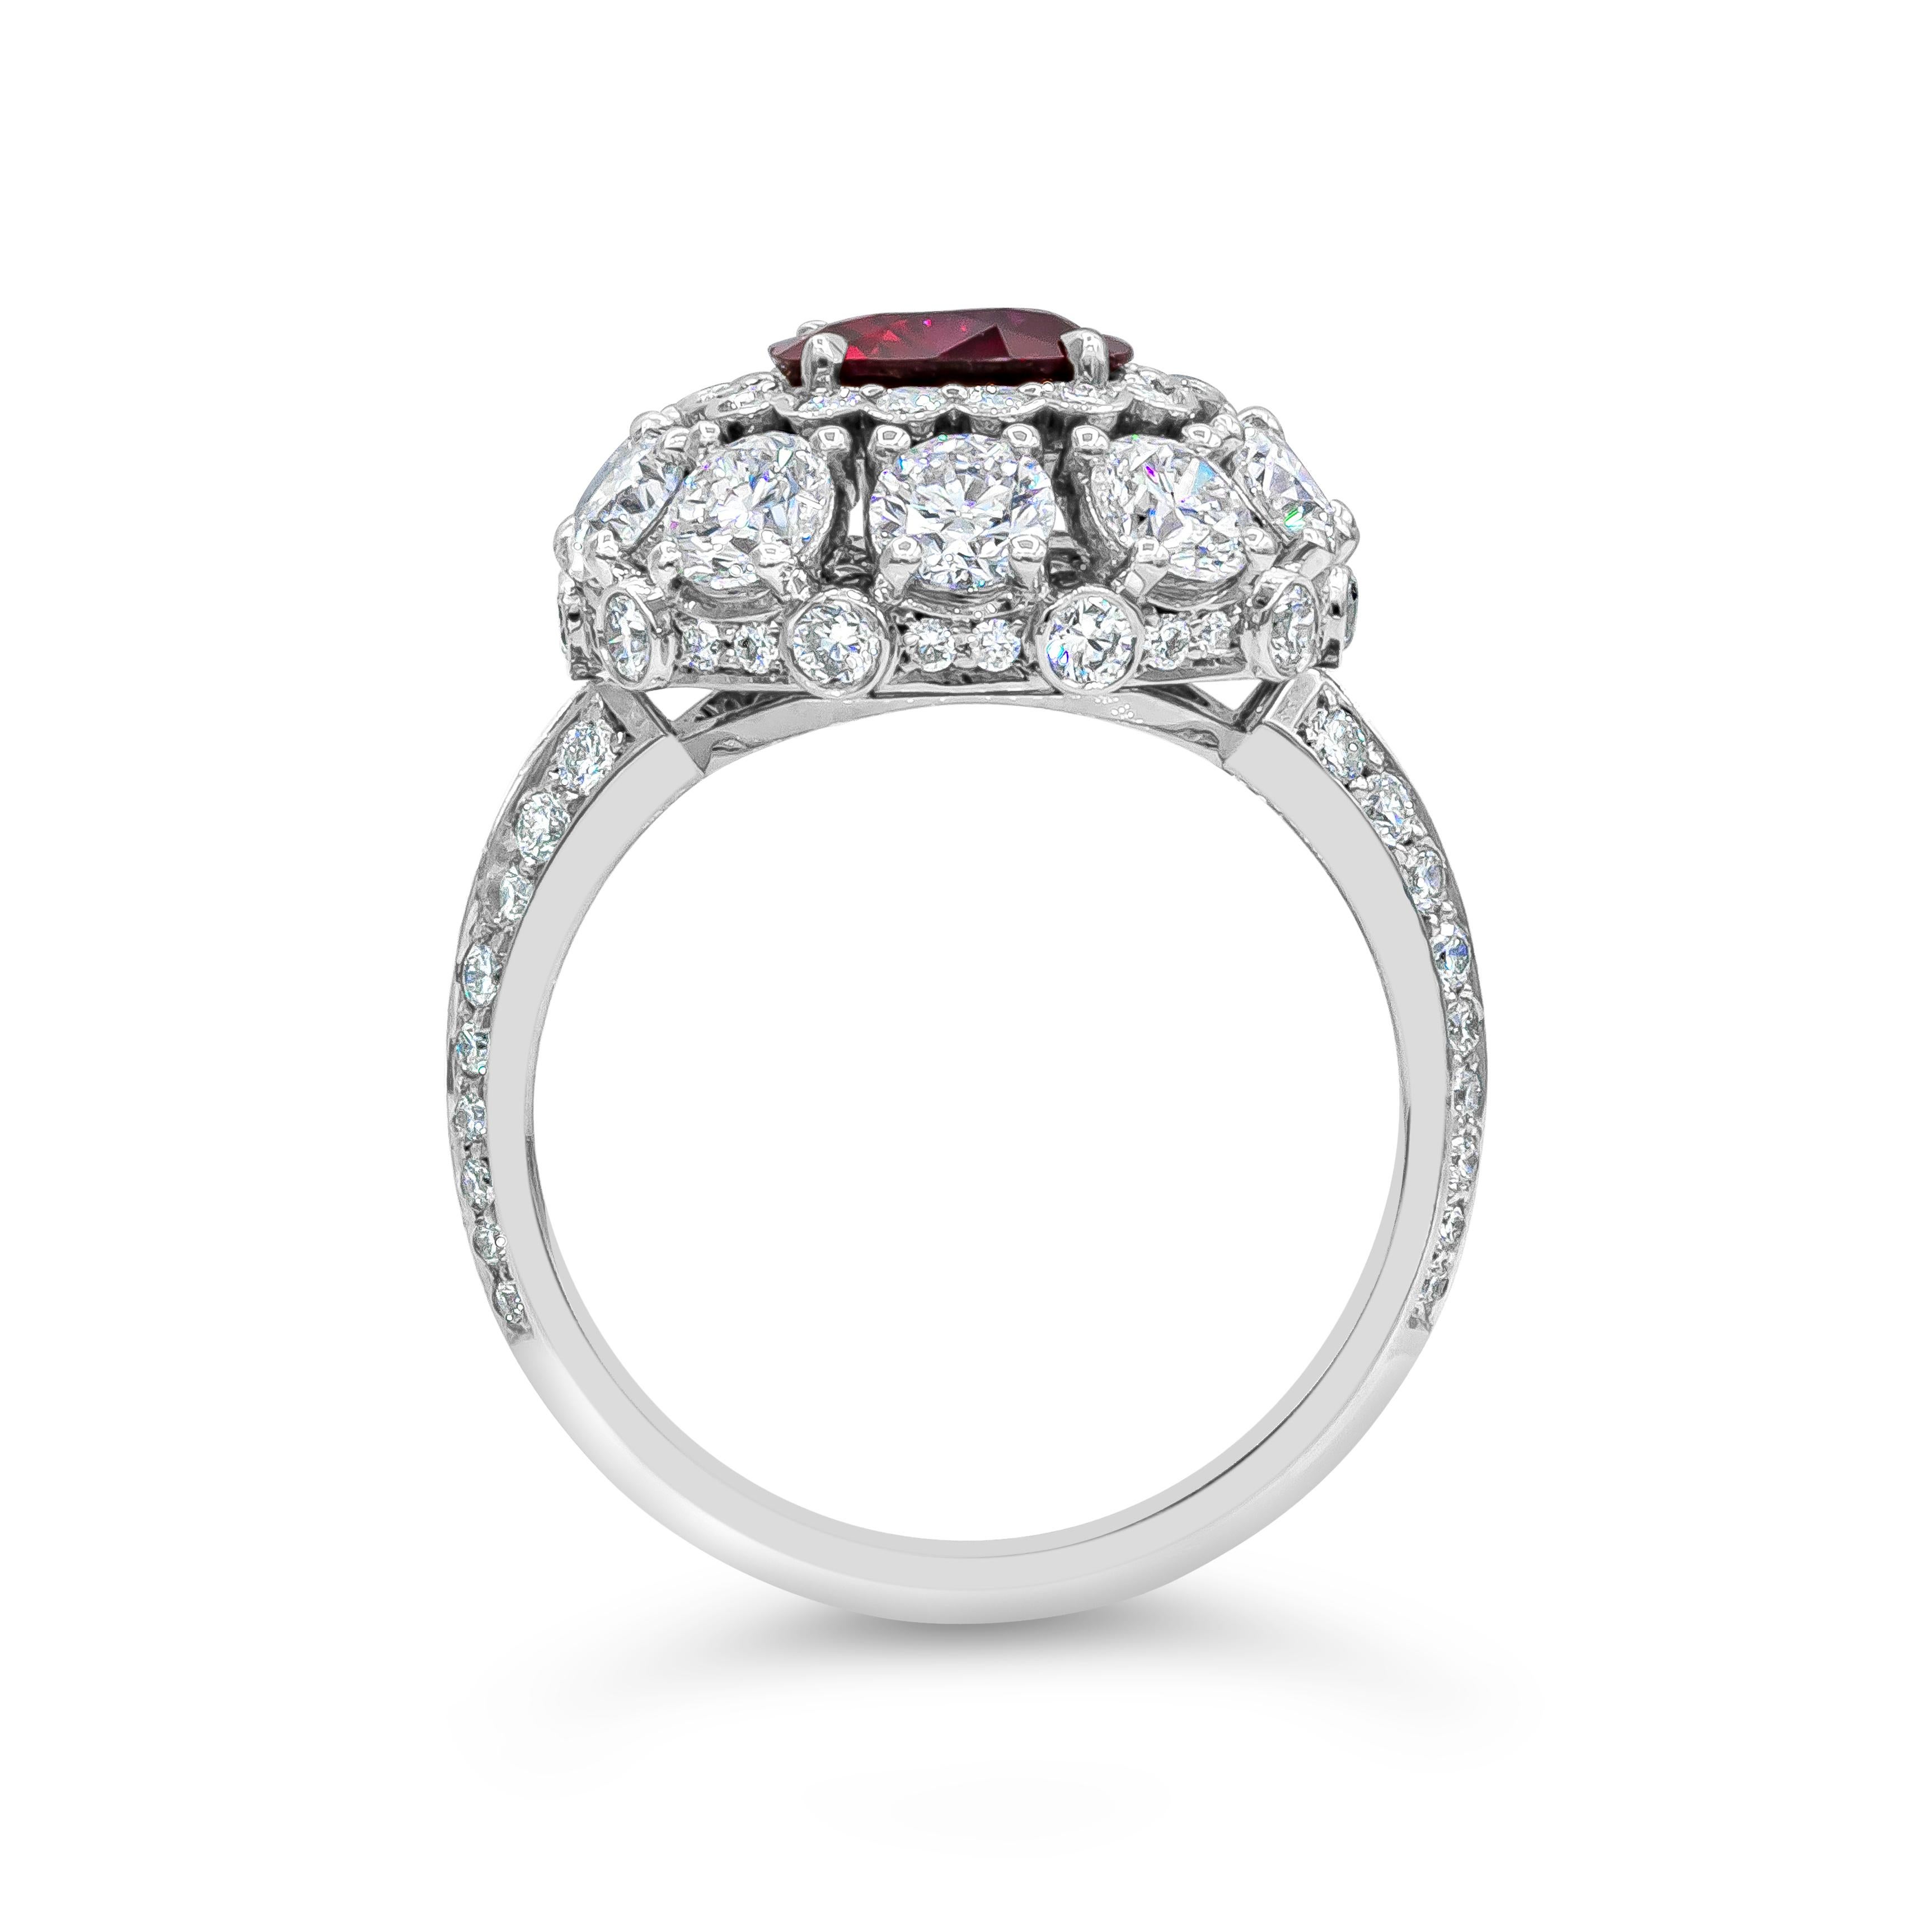 A beautiful halo engagement ring style showcasing a 1.69 carats color-rich red cushion cut ruby certified by AGL as Burmese Origin with no indications of heat treatment. Set in a handcrafted, intricately-designed halo mounting accented with round